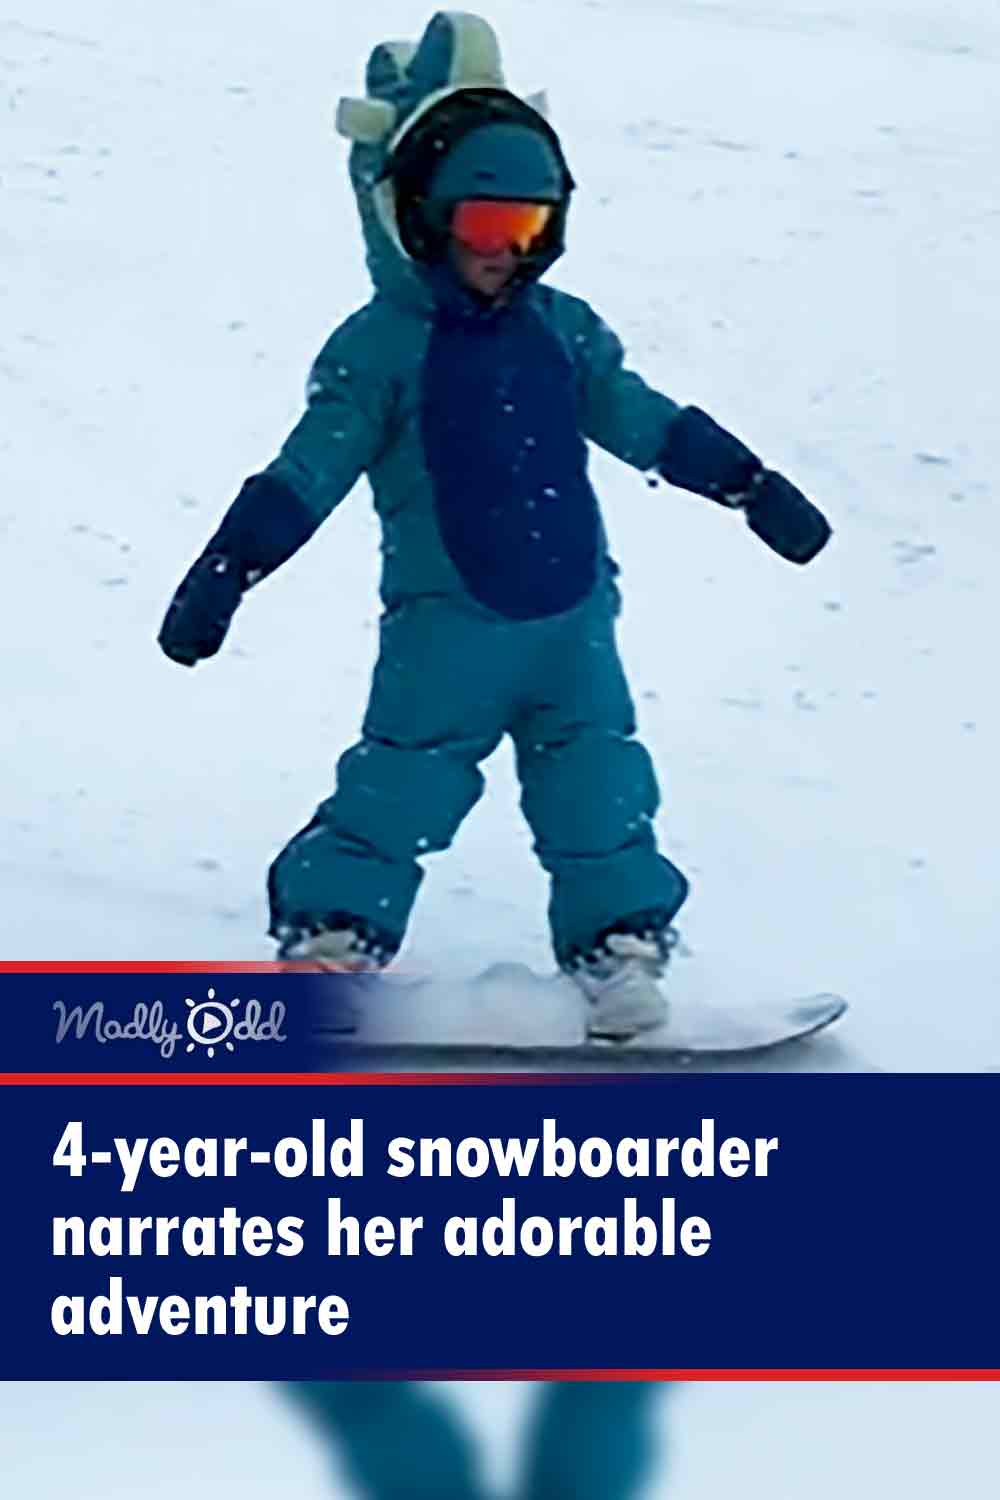 4-year-old snowboarder narrates her adorable adventure